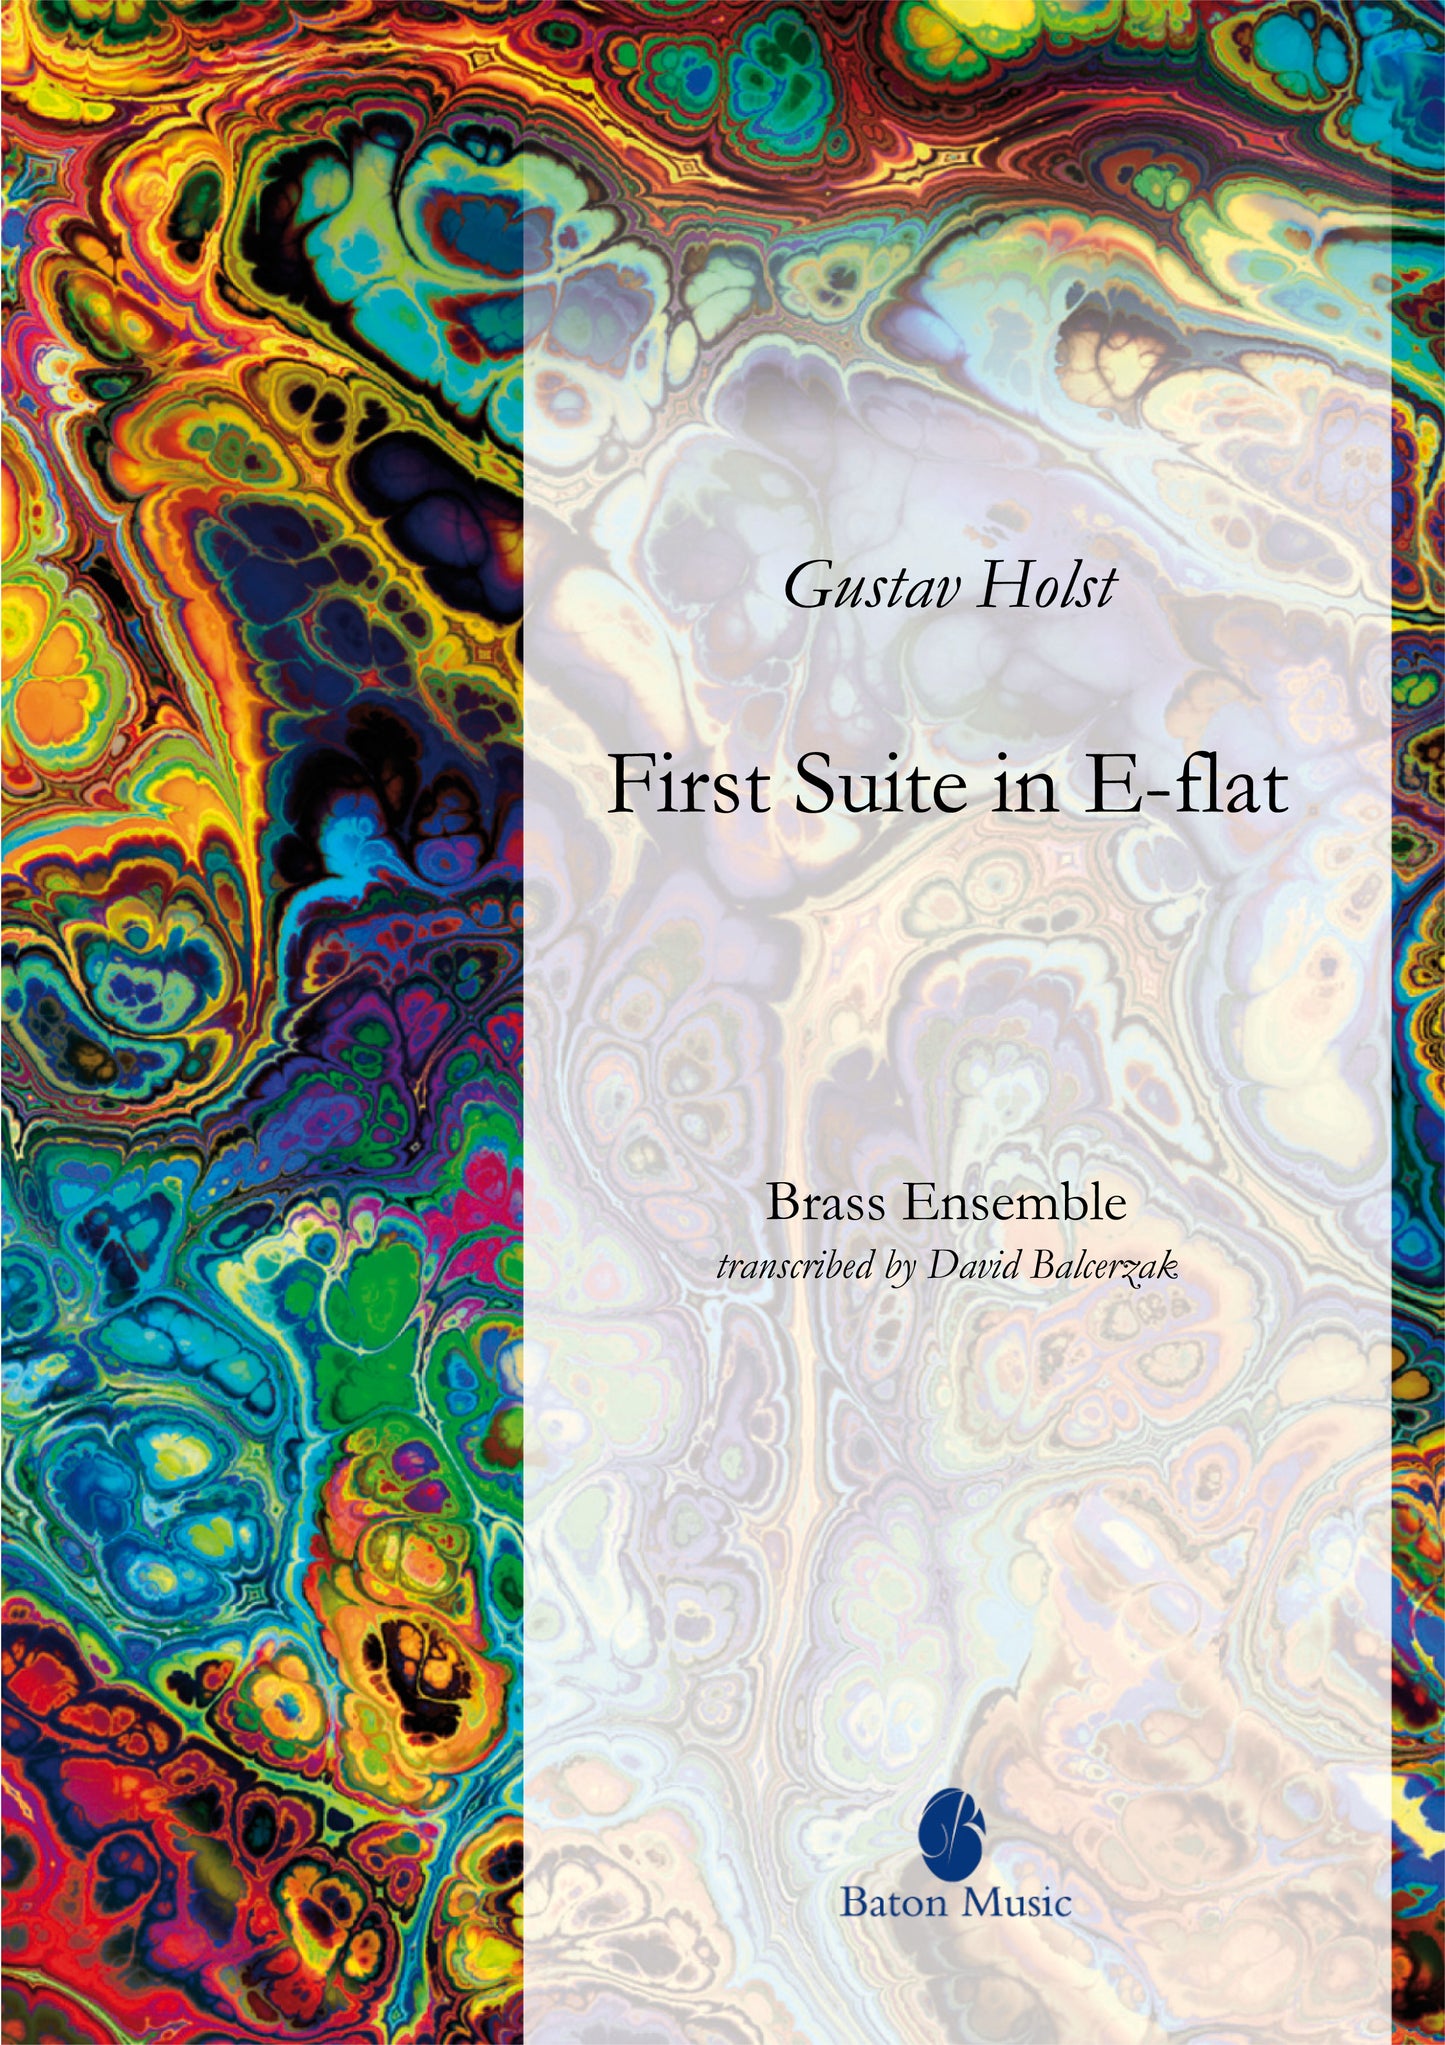 First Suite in E-flat - Gustav Holst